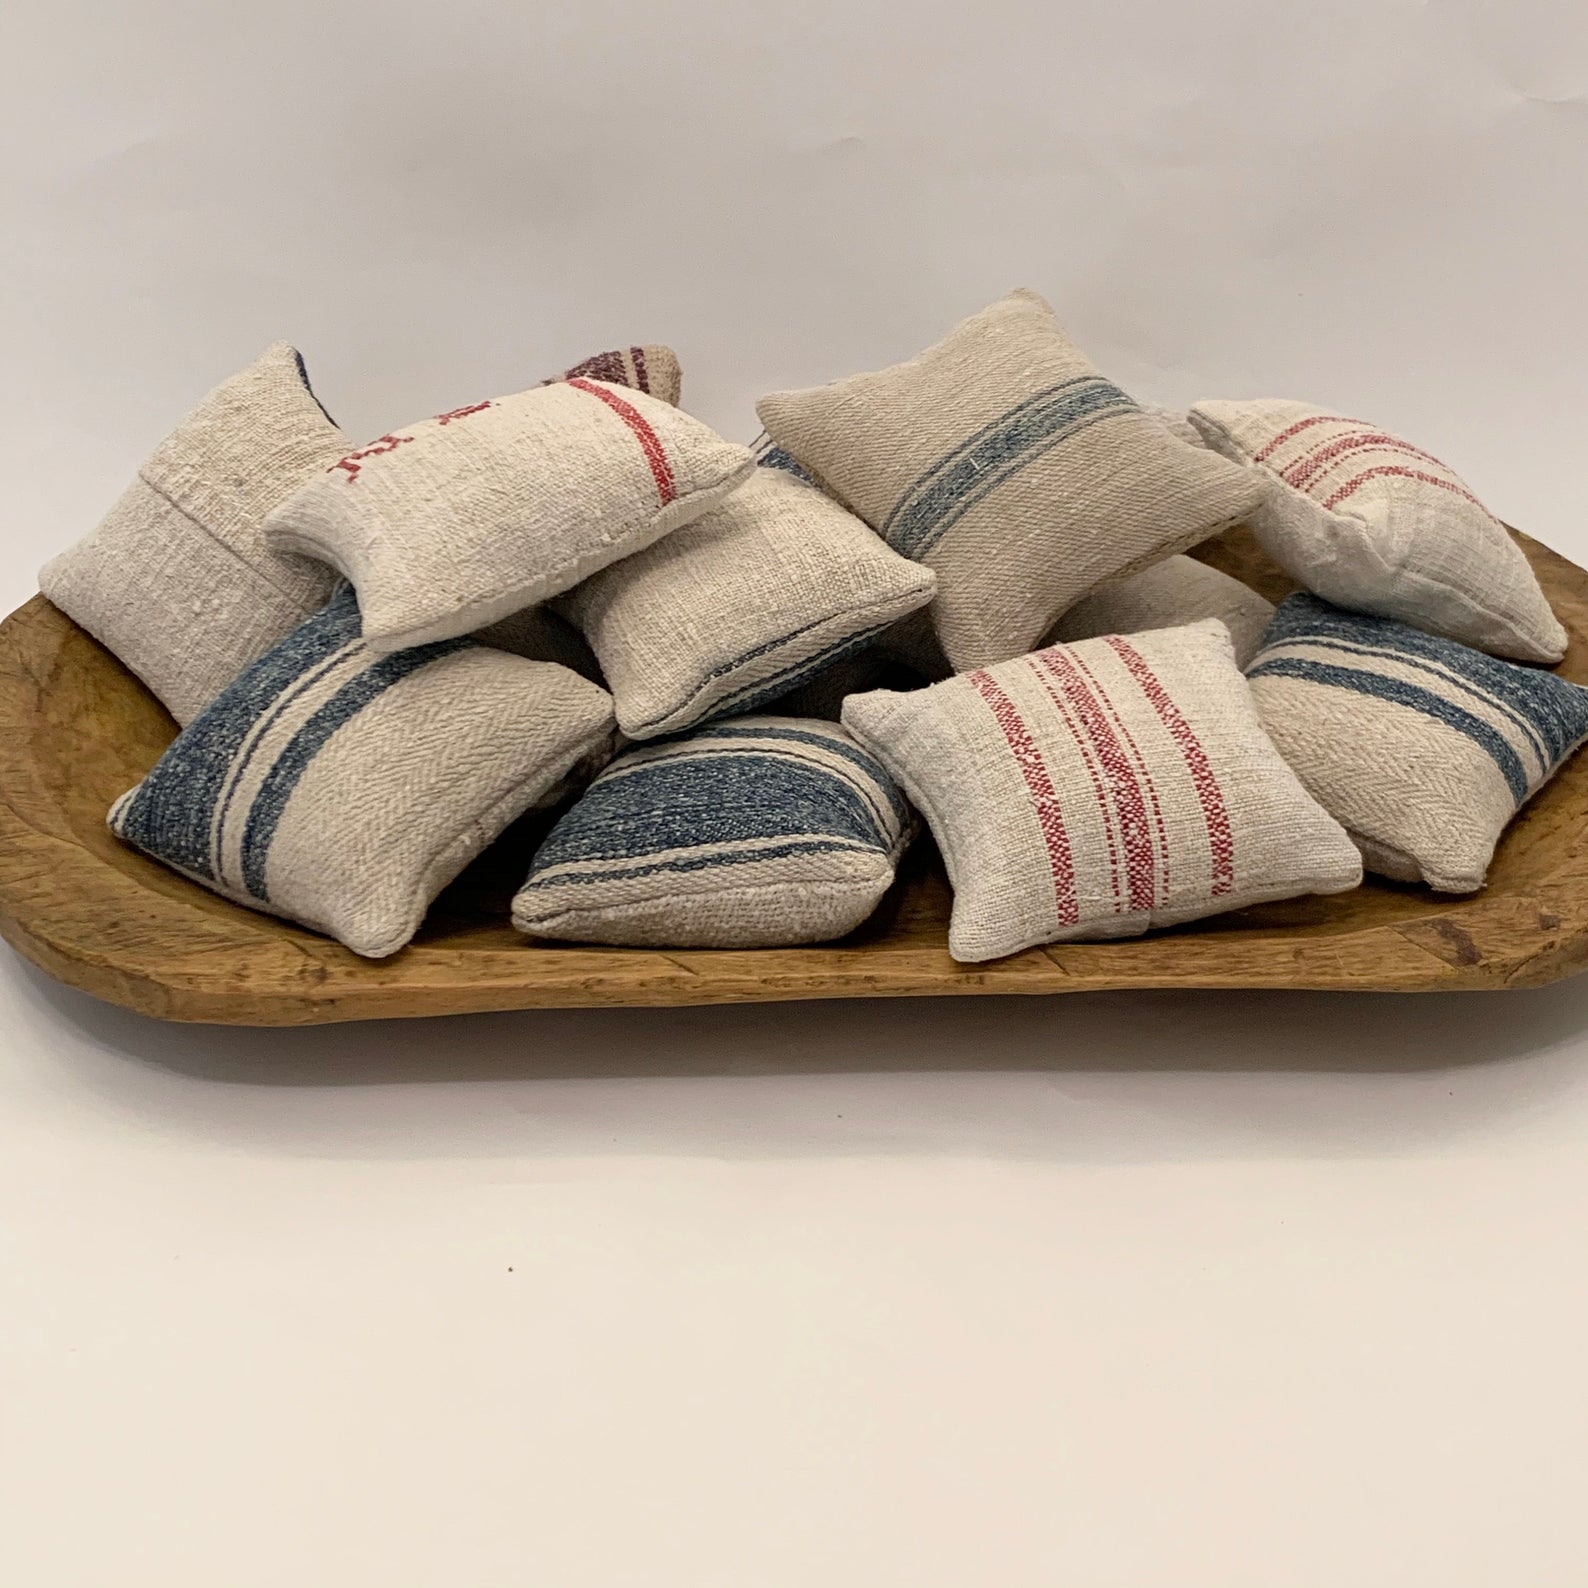 Wooden bowl full of small lavender sachets made out of French vintage grain sacks